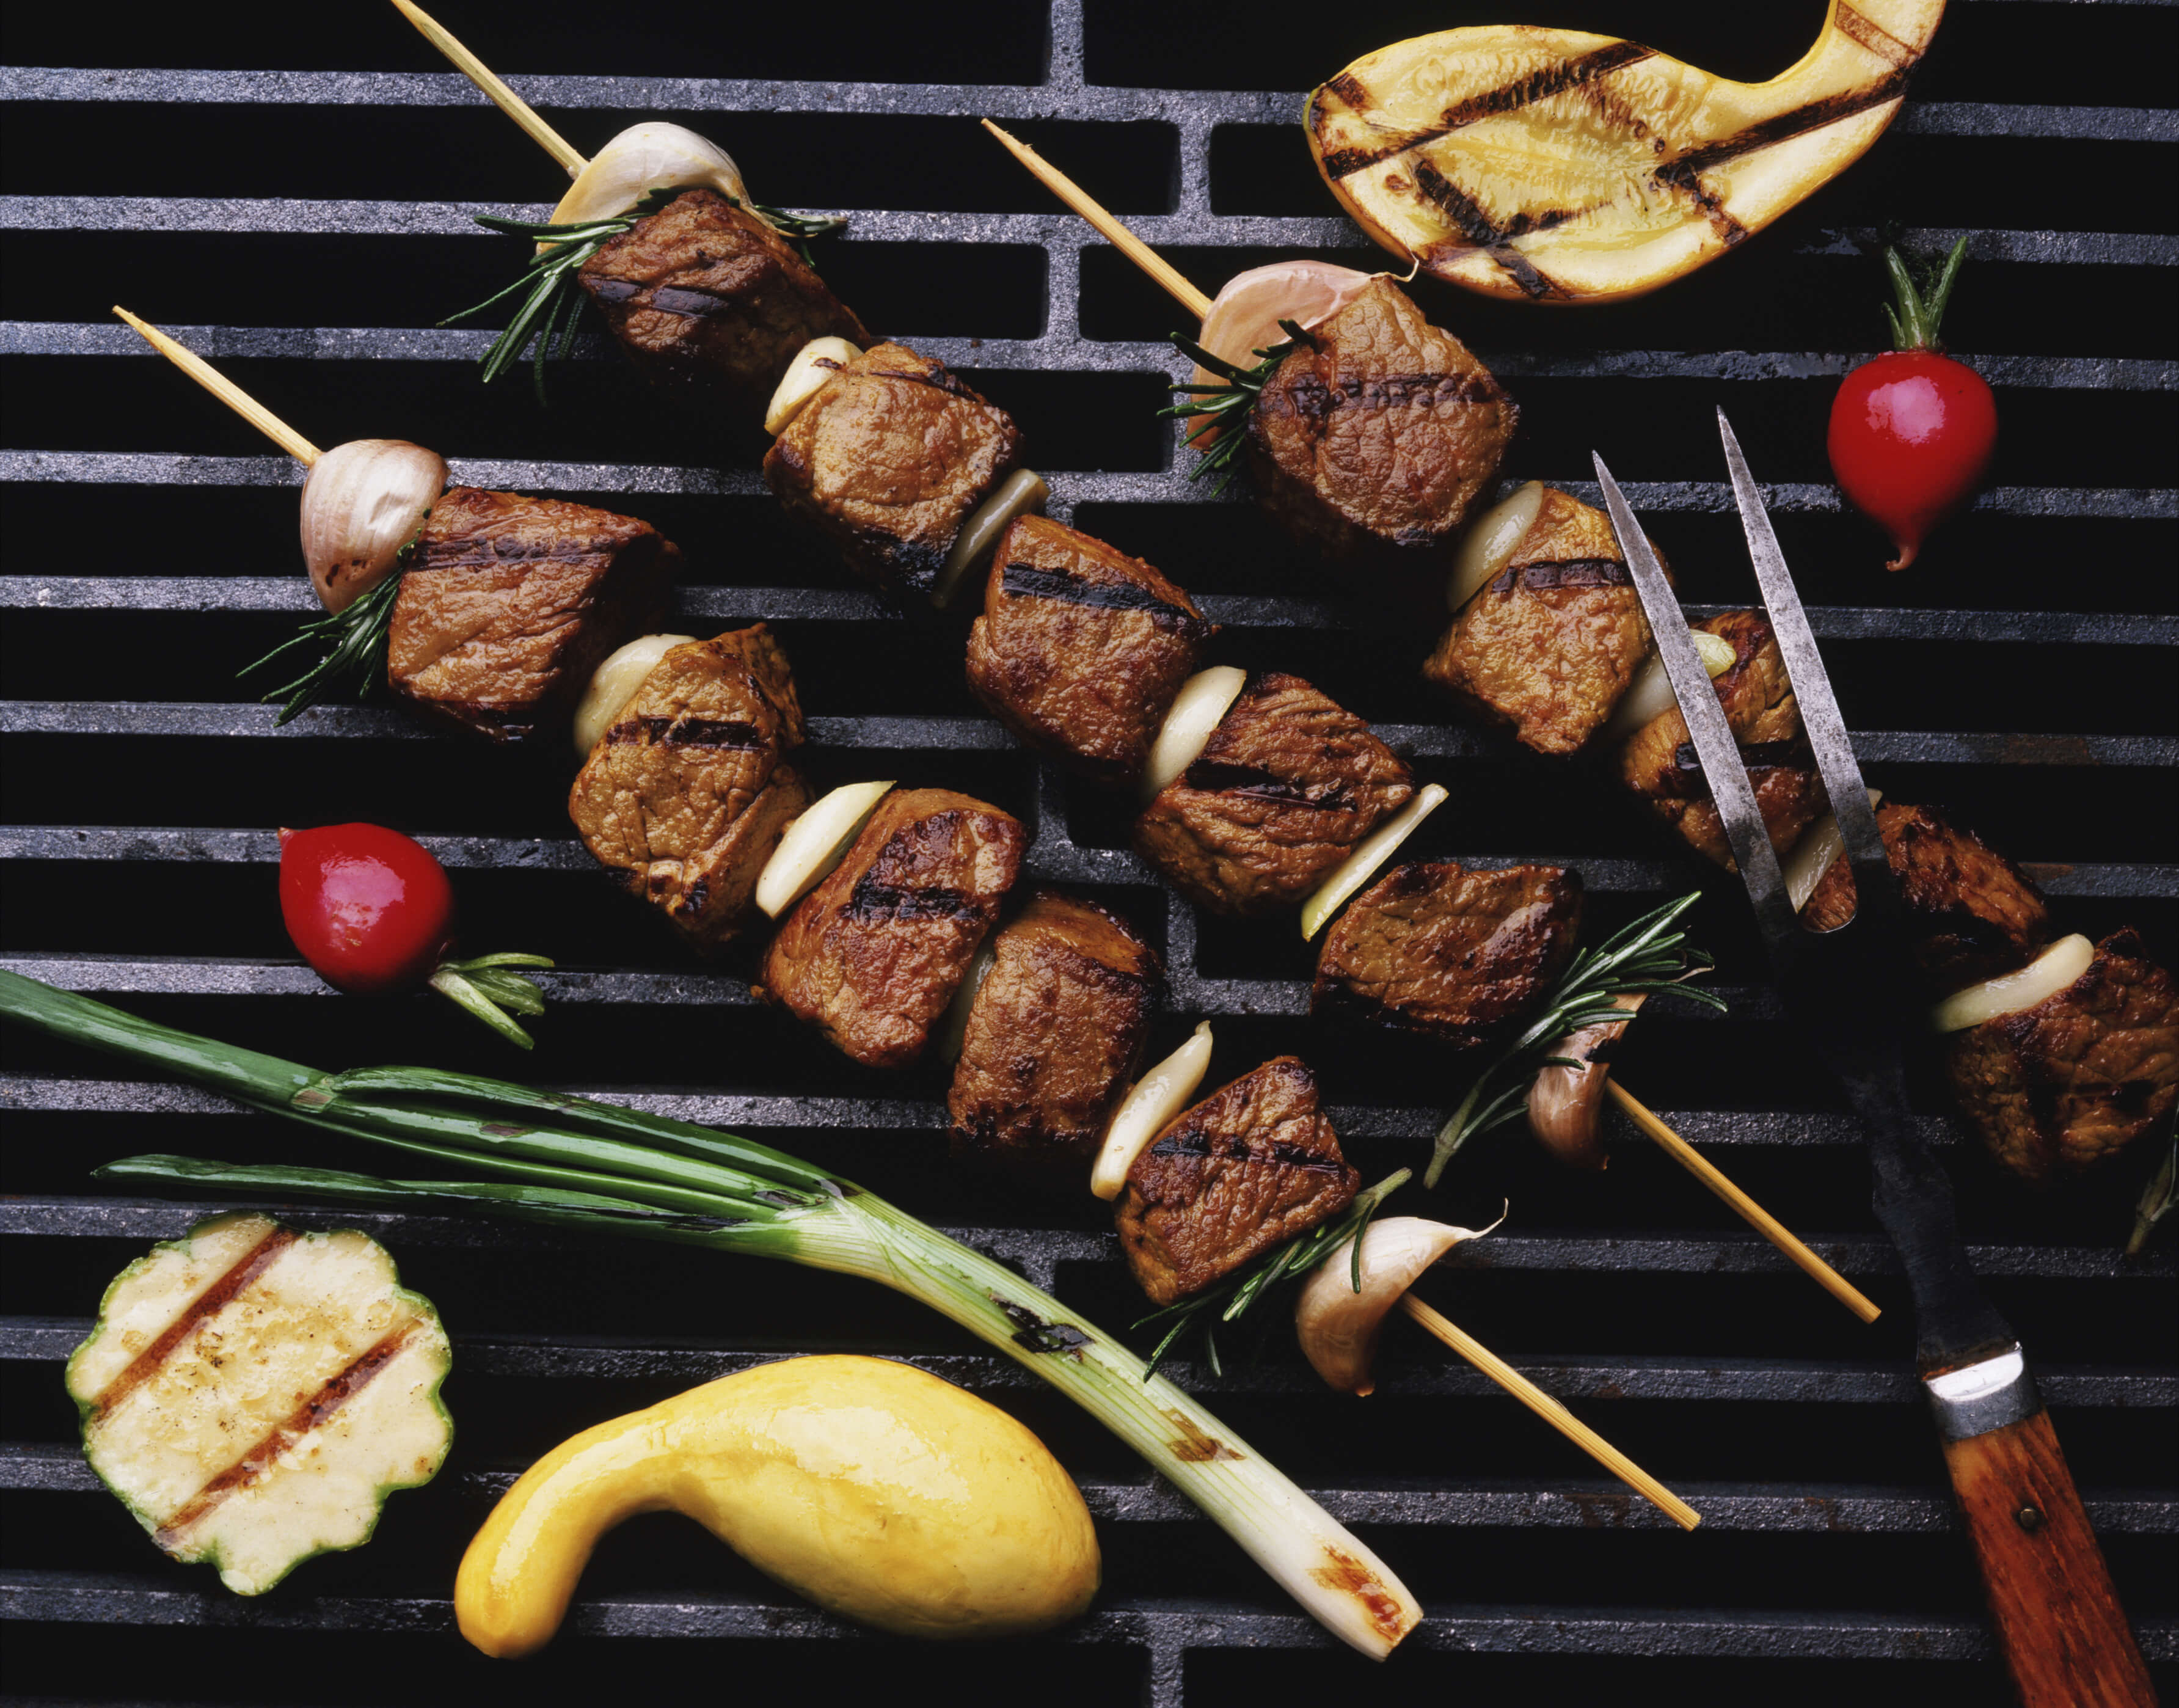 Barbecue, prepared meat and different vegetables an grill